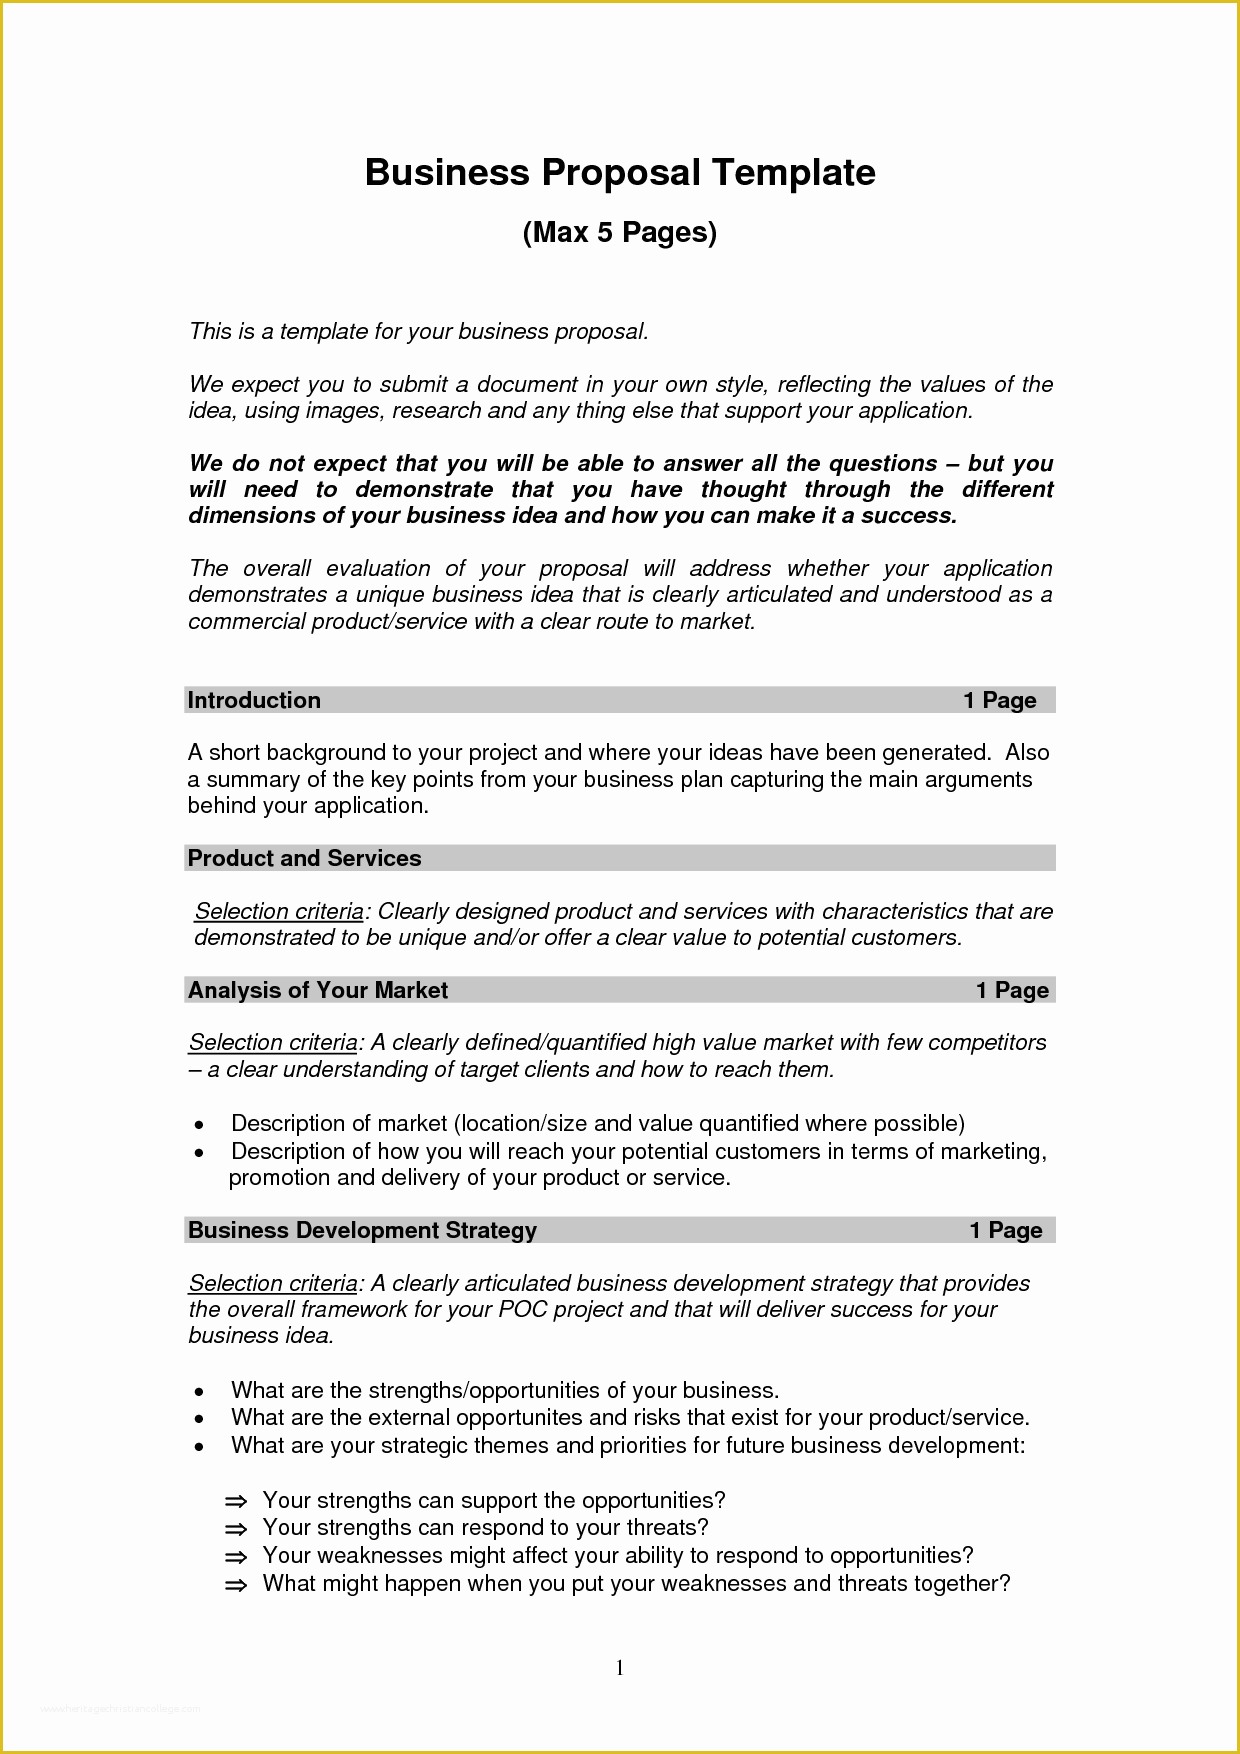 Free Online Business Proposal Template Of Business Proposal Templates Examples